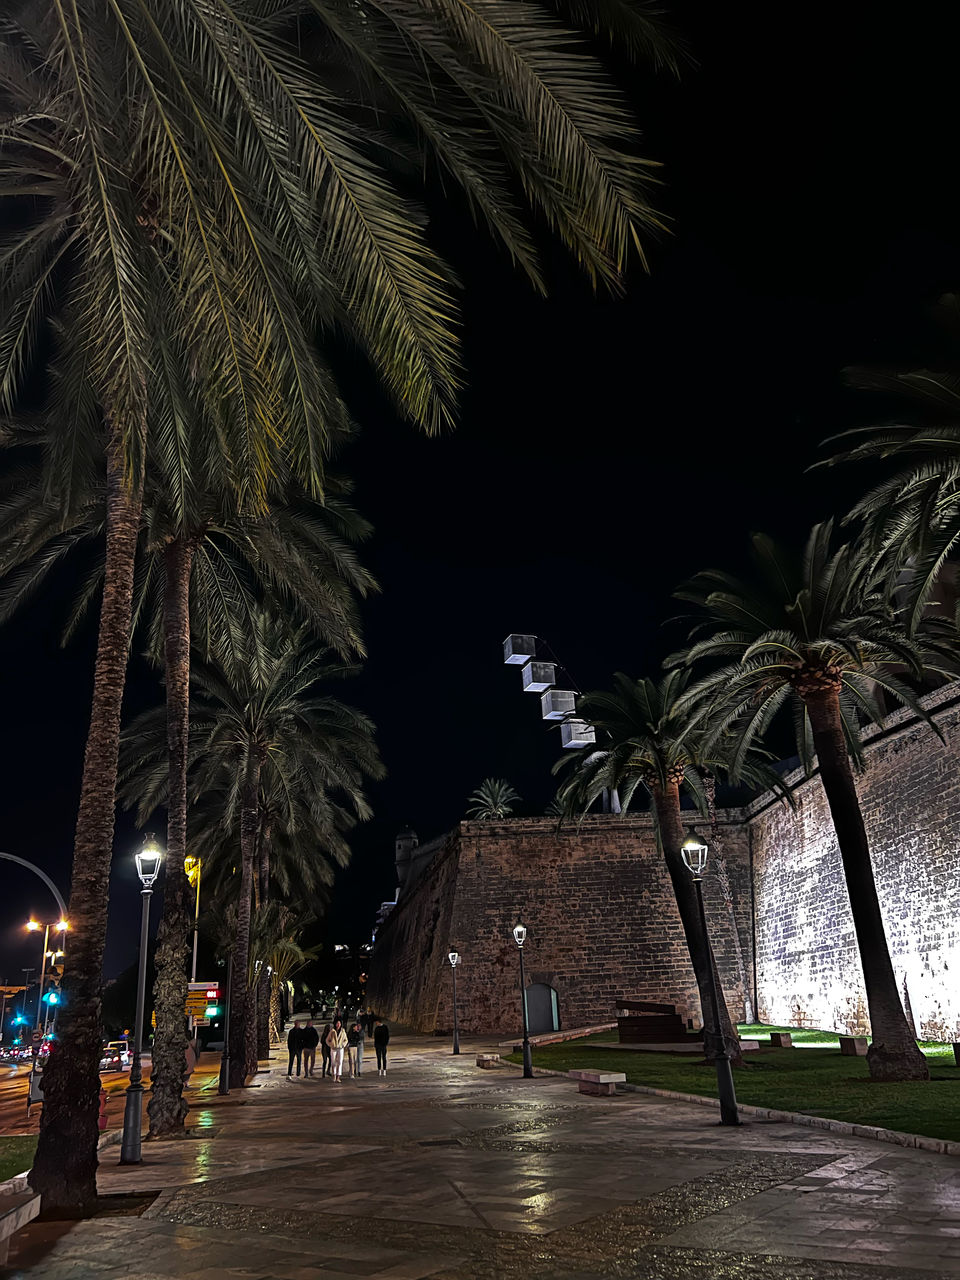 palm tree, tropical climate, night, tree, plant, architecture, nature, evening, street, city, illuminated, built structure, darkness, travel destinations, building exterior, outdoors, light, no people, sky, lighting, water